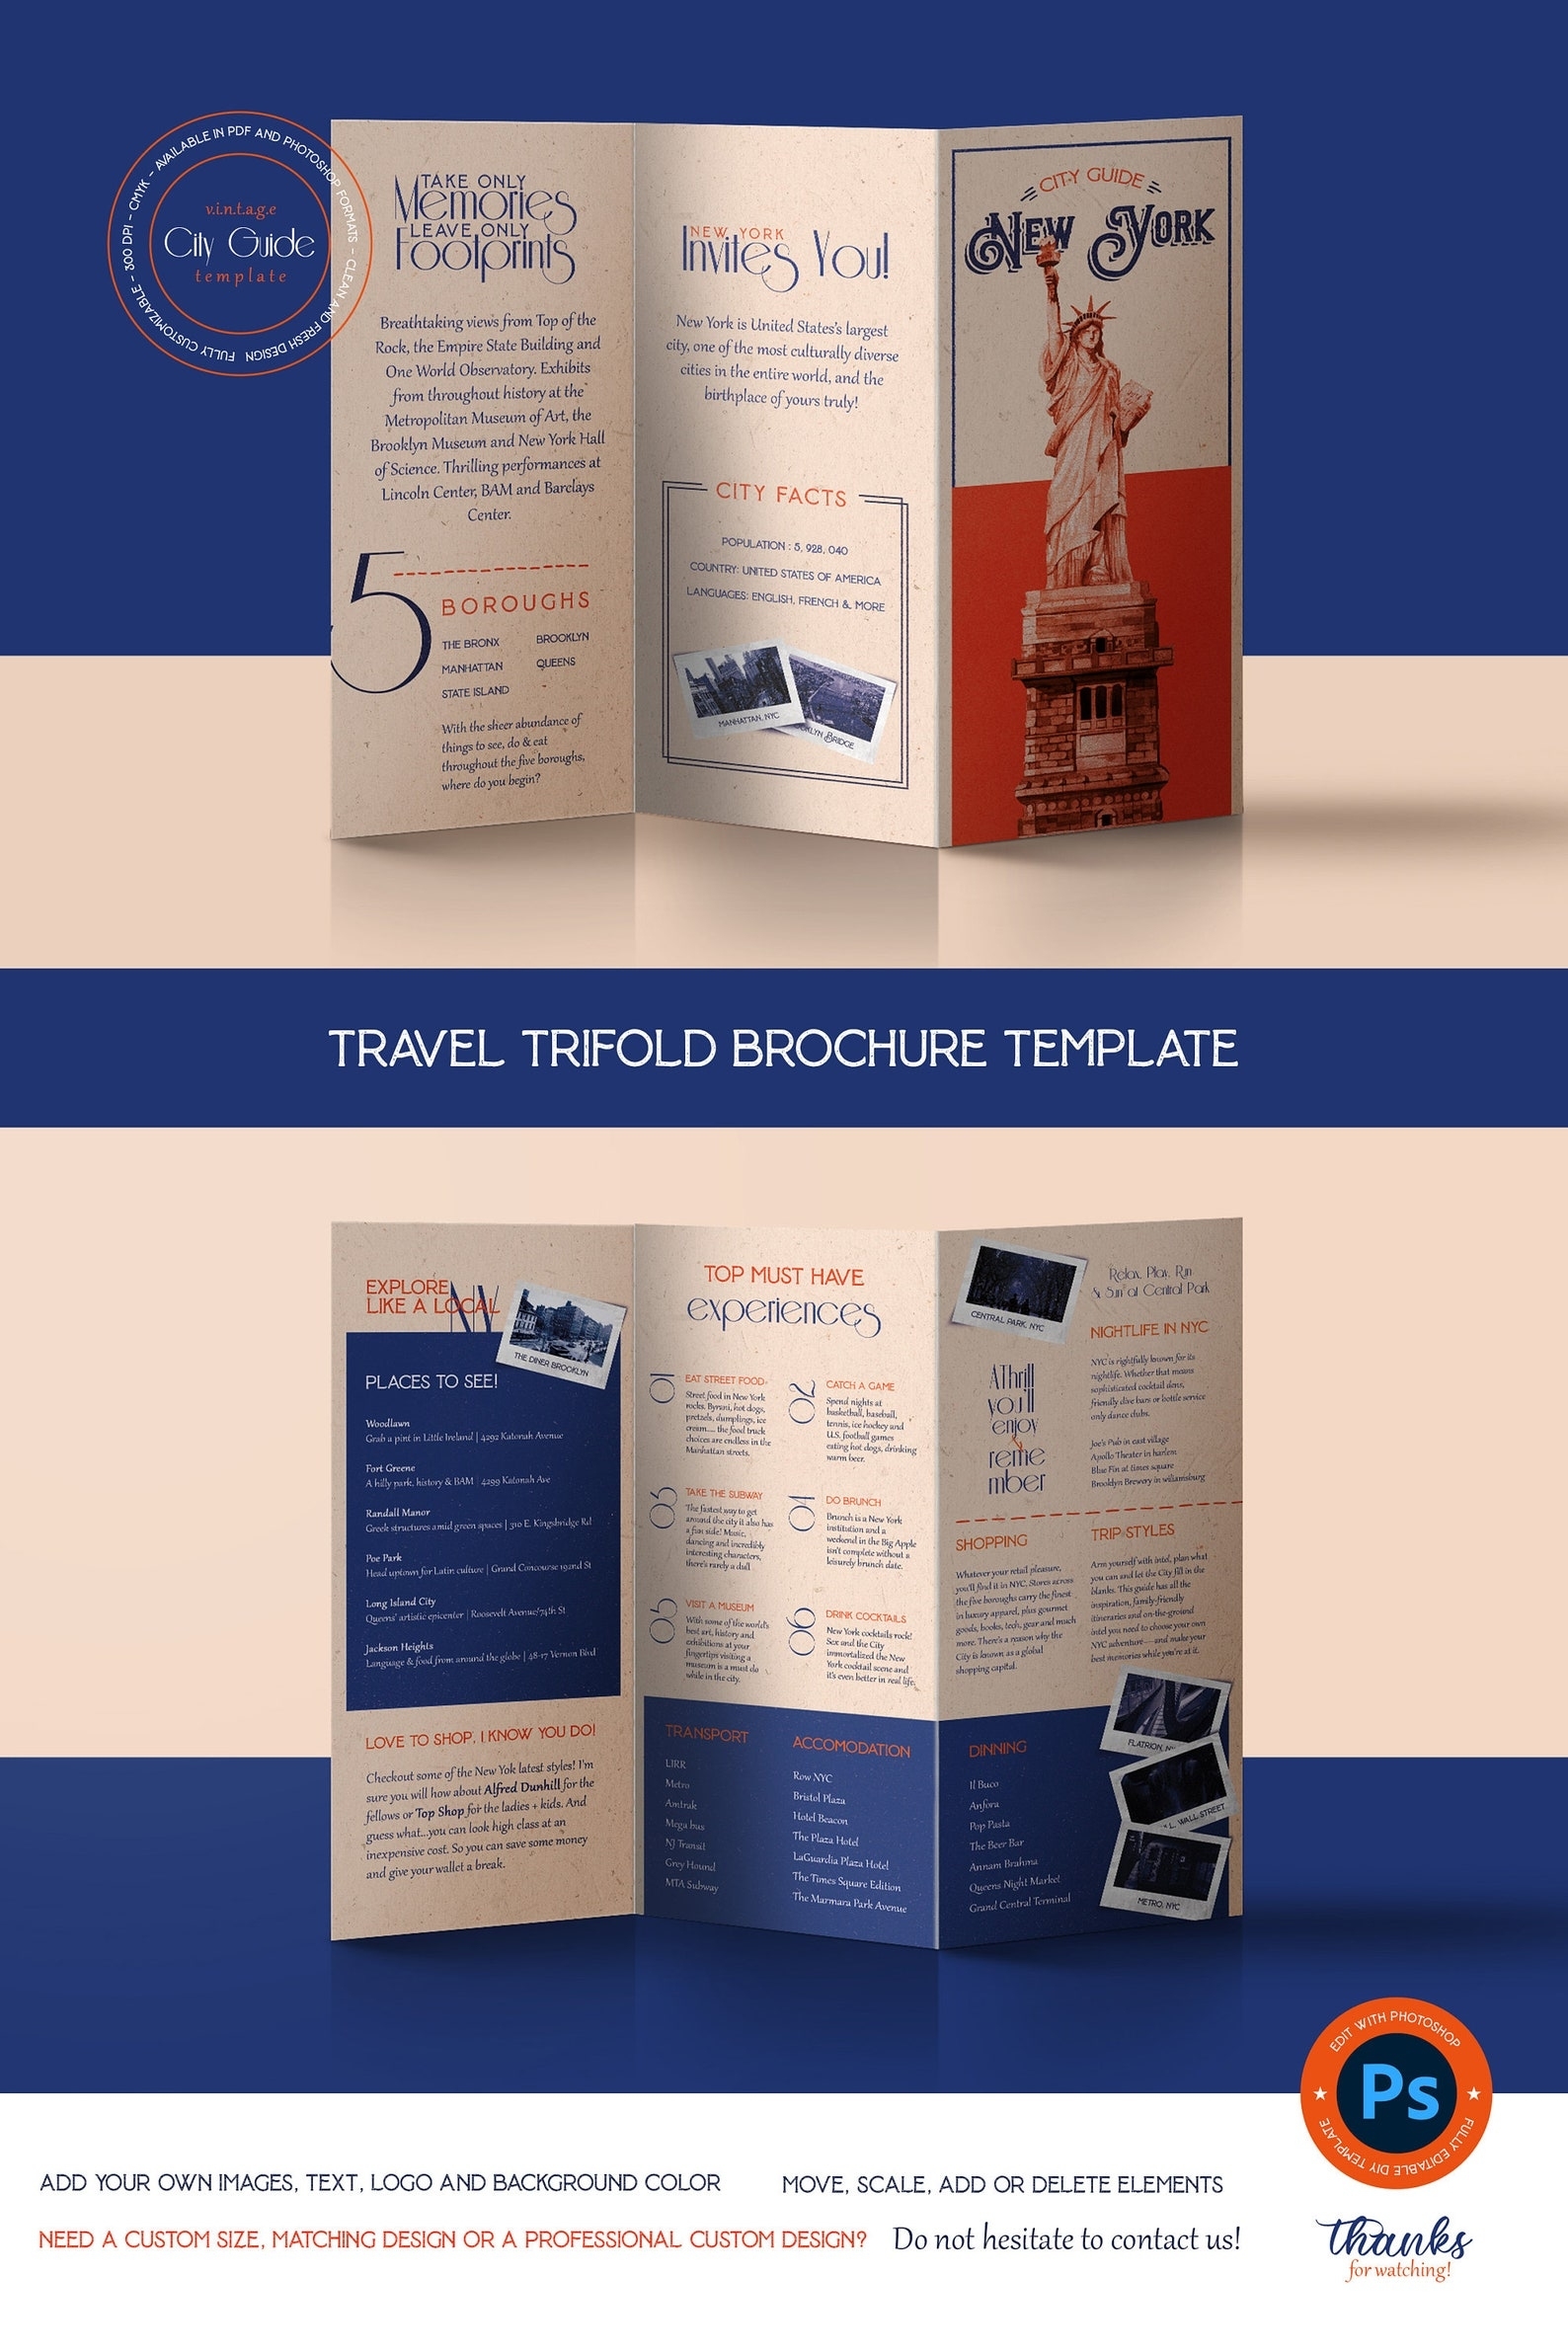 City Guide Vintage Trifold Brochure Template Diy Travel | Etsy With Regard To Travel Guide Brochure Template